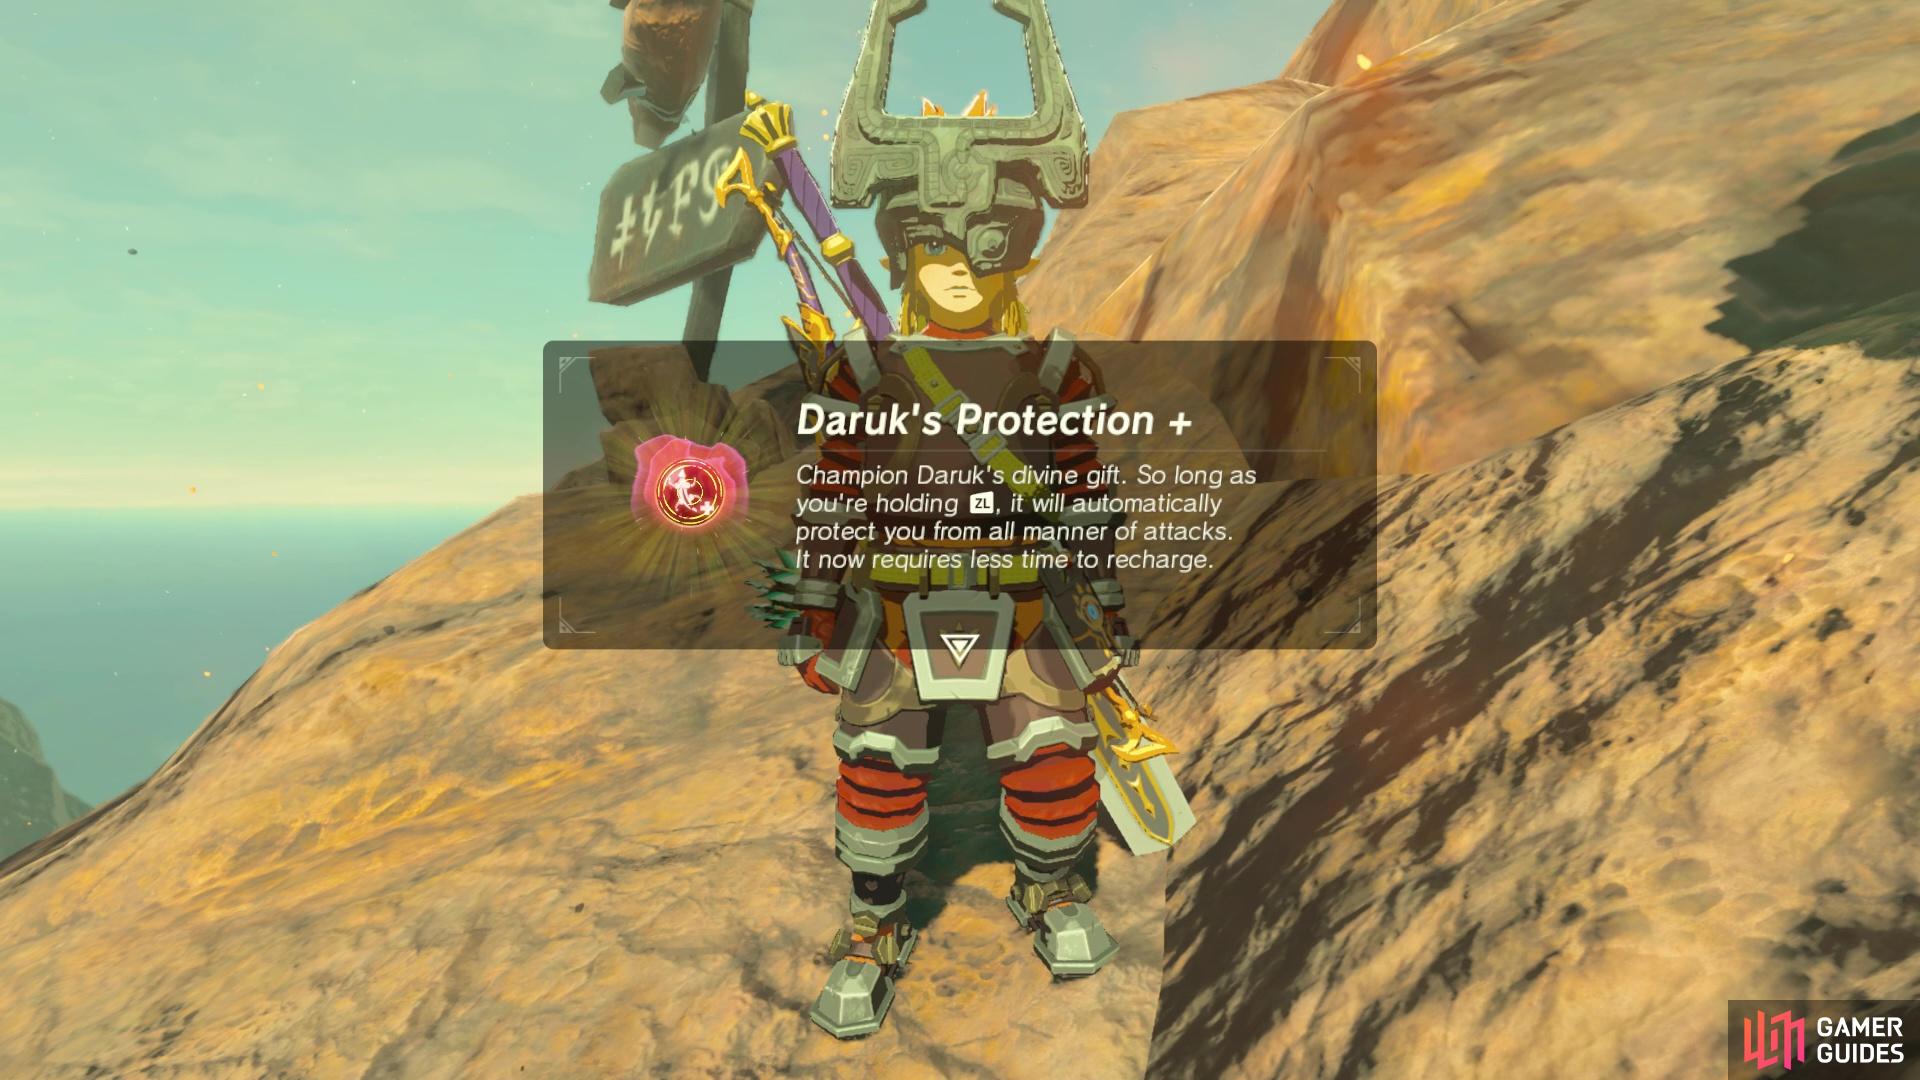 Yay! Less recharge on Daruk's Protection.